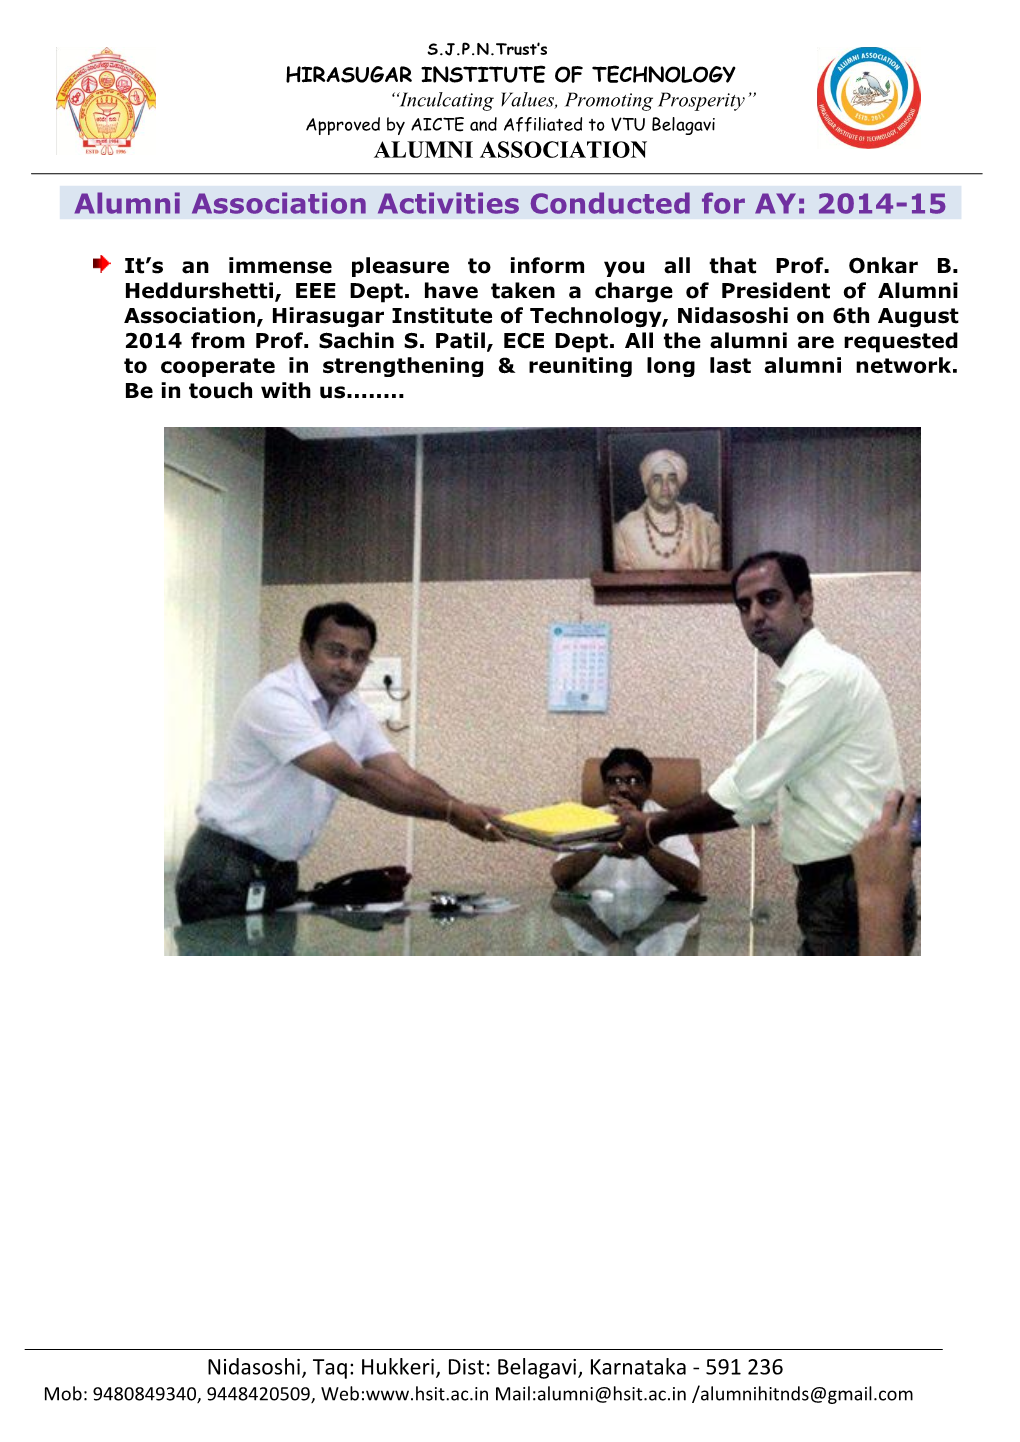 Alumni Association Activities Conducted for AY: 2014-15